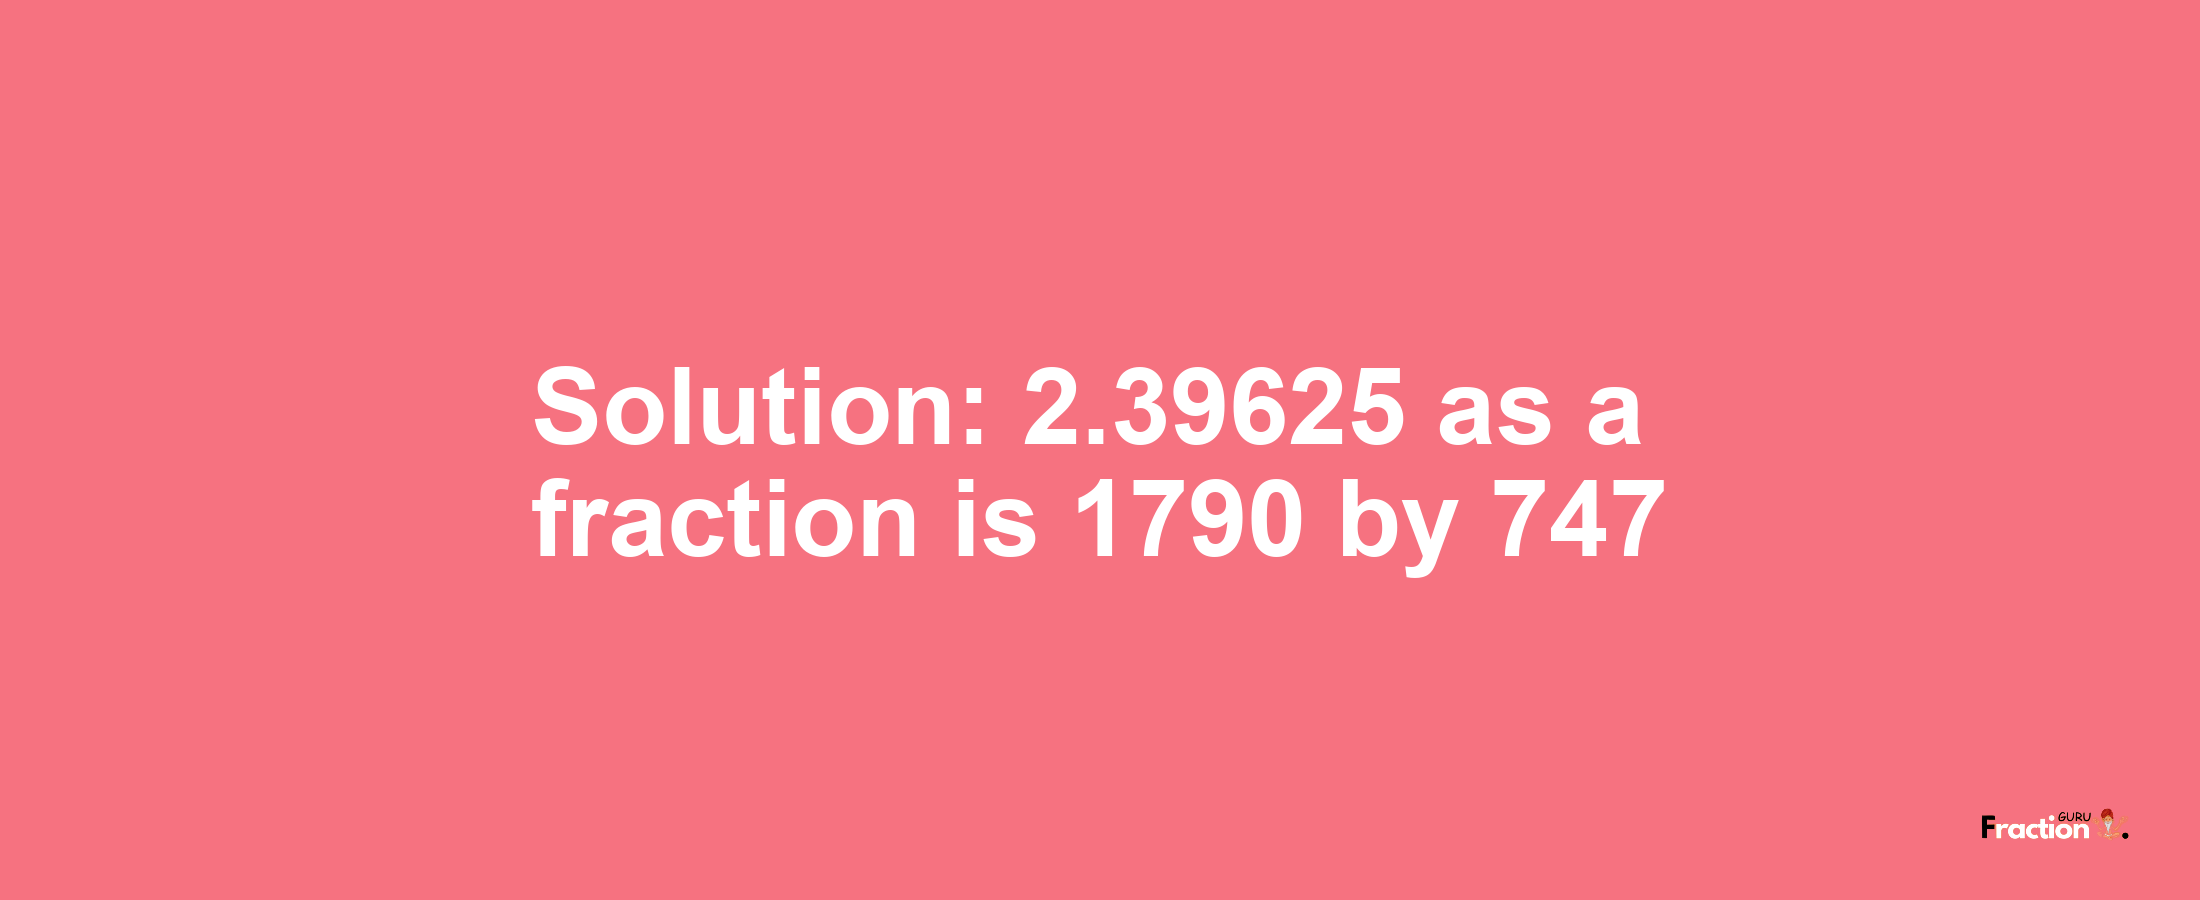 Solution:2.39625 as a fraction is 1790/747